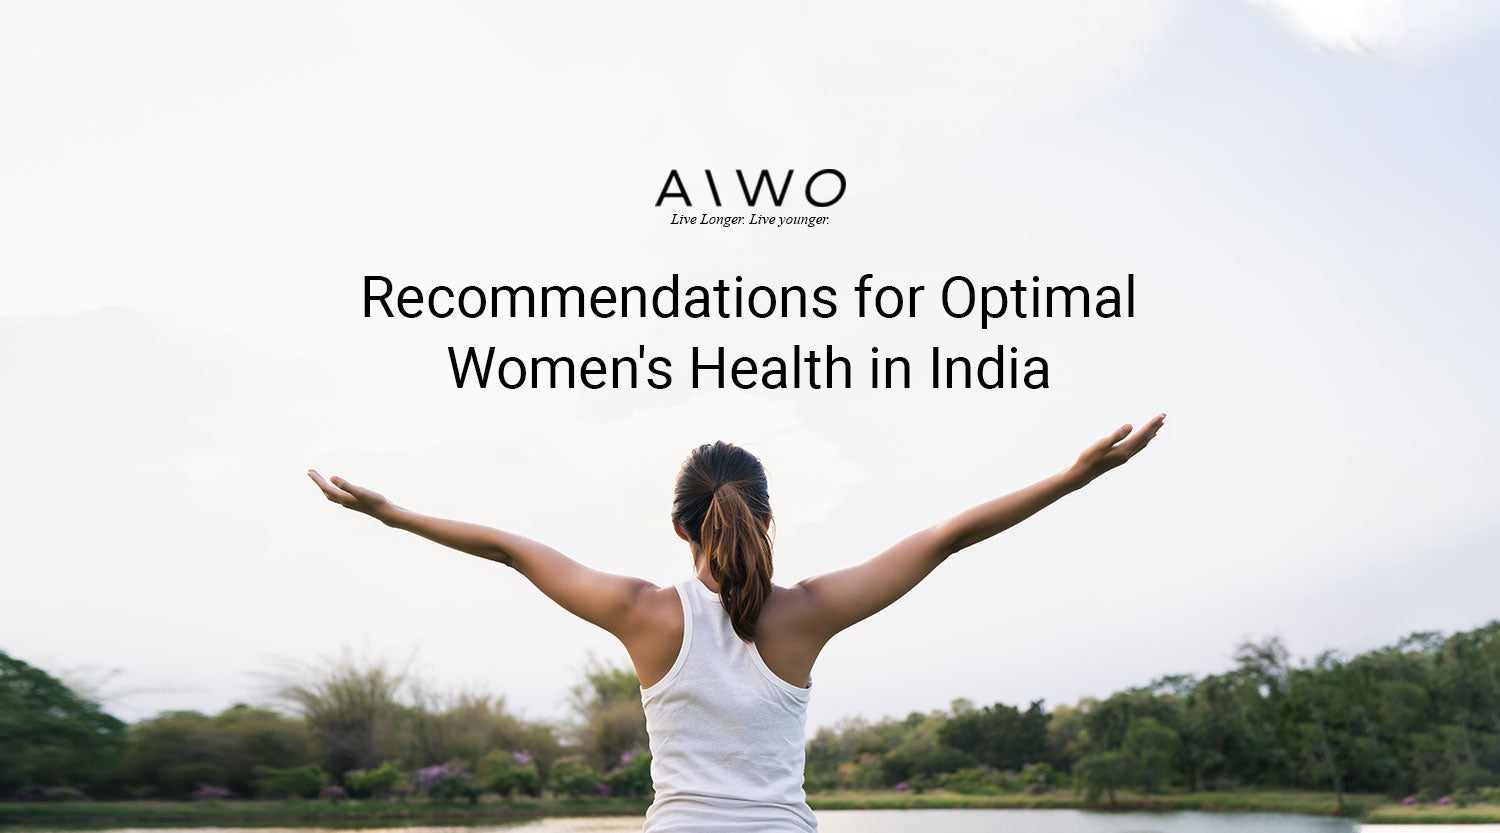 Balancing Act: AIWO's Recommendations for Optimal Women's Health in India